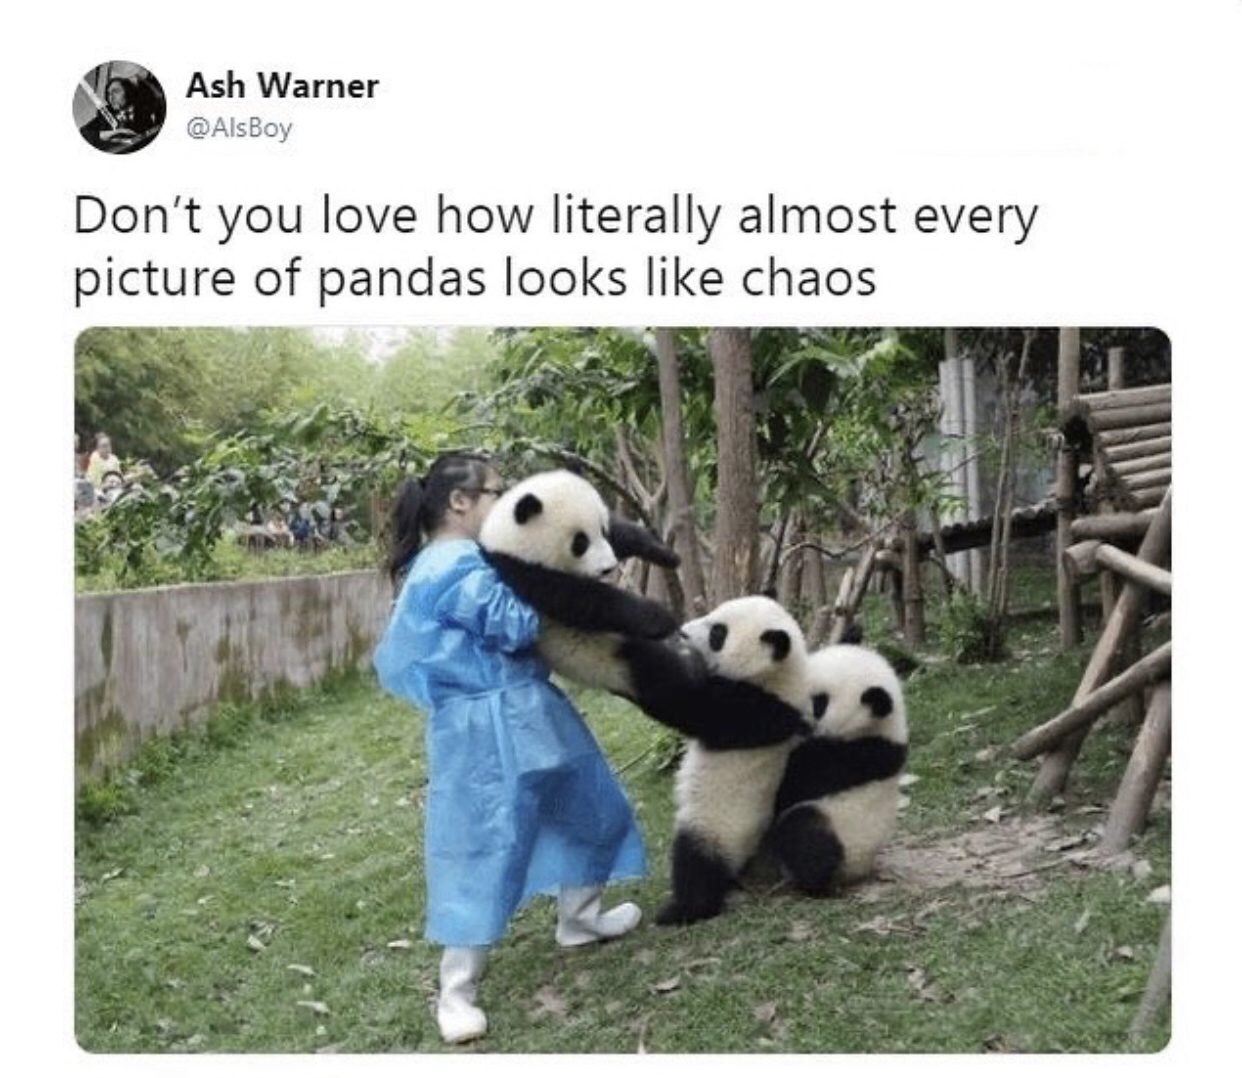 panda tug of war - Ash Warner Don't you love how literally almost every picture of pandas looks chaos